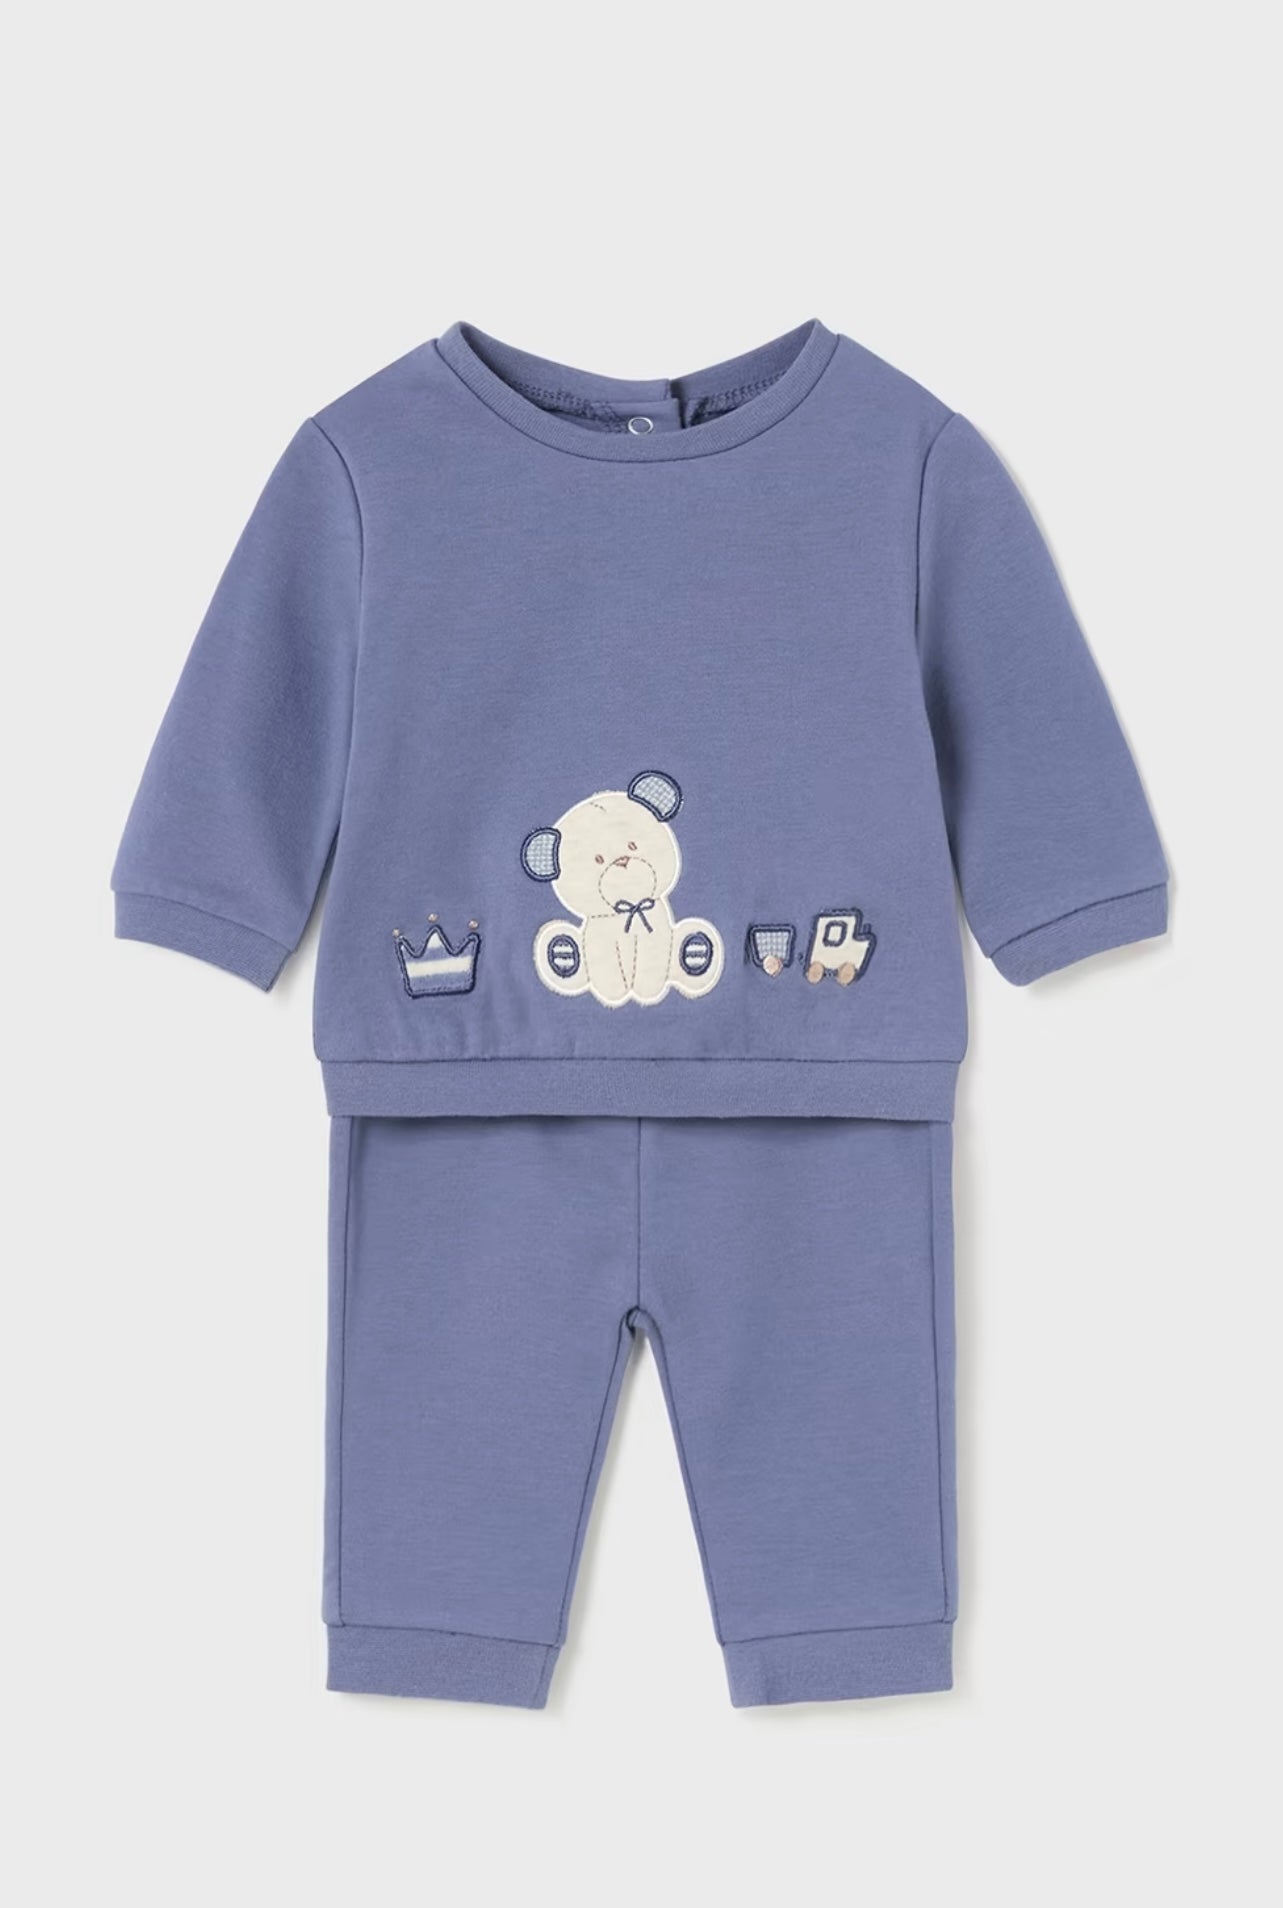 Mayoral Two Piece Cotton Bear Outfit